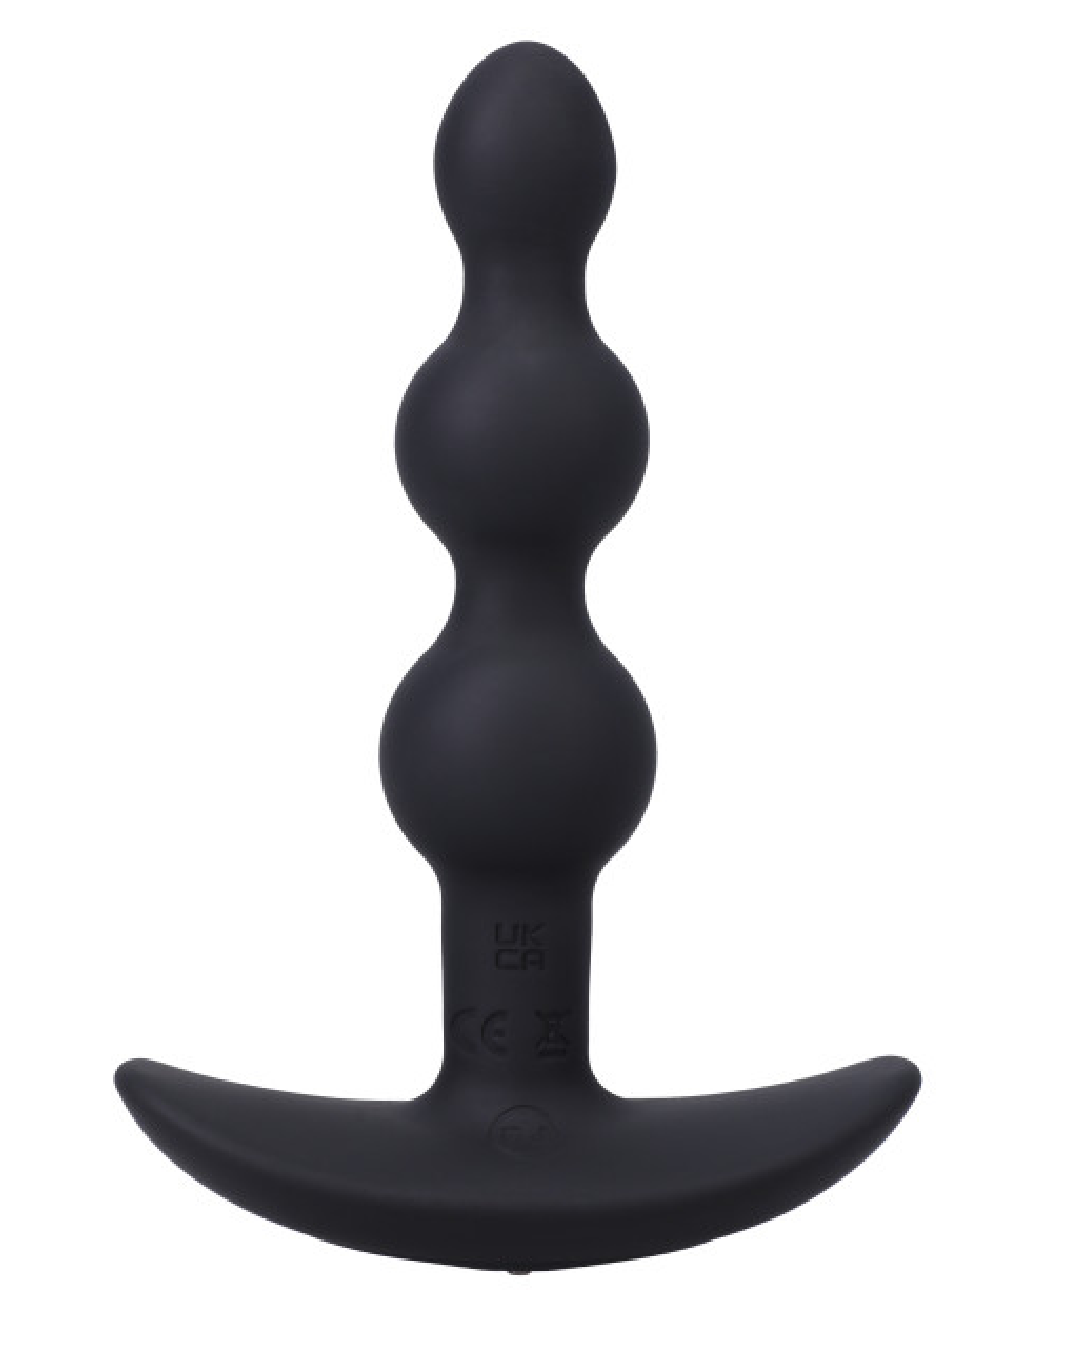 A-Play Beaded Vibrating Anal Beads with Remote - Black